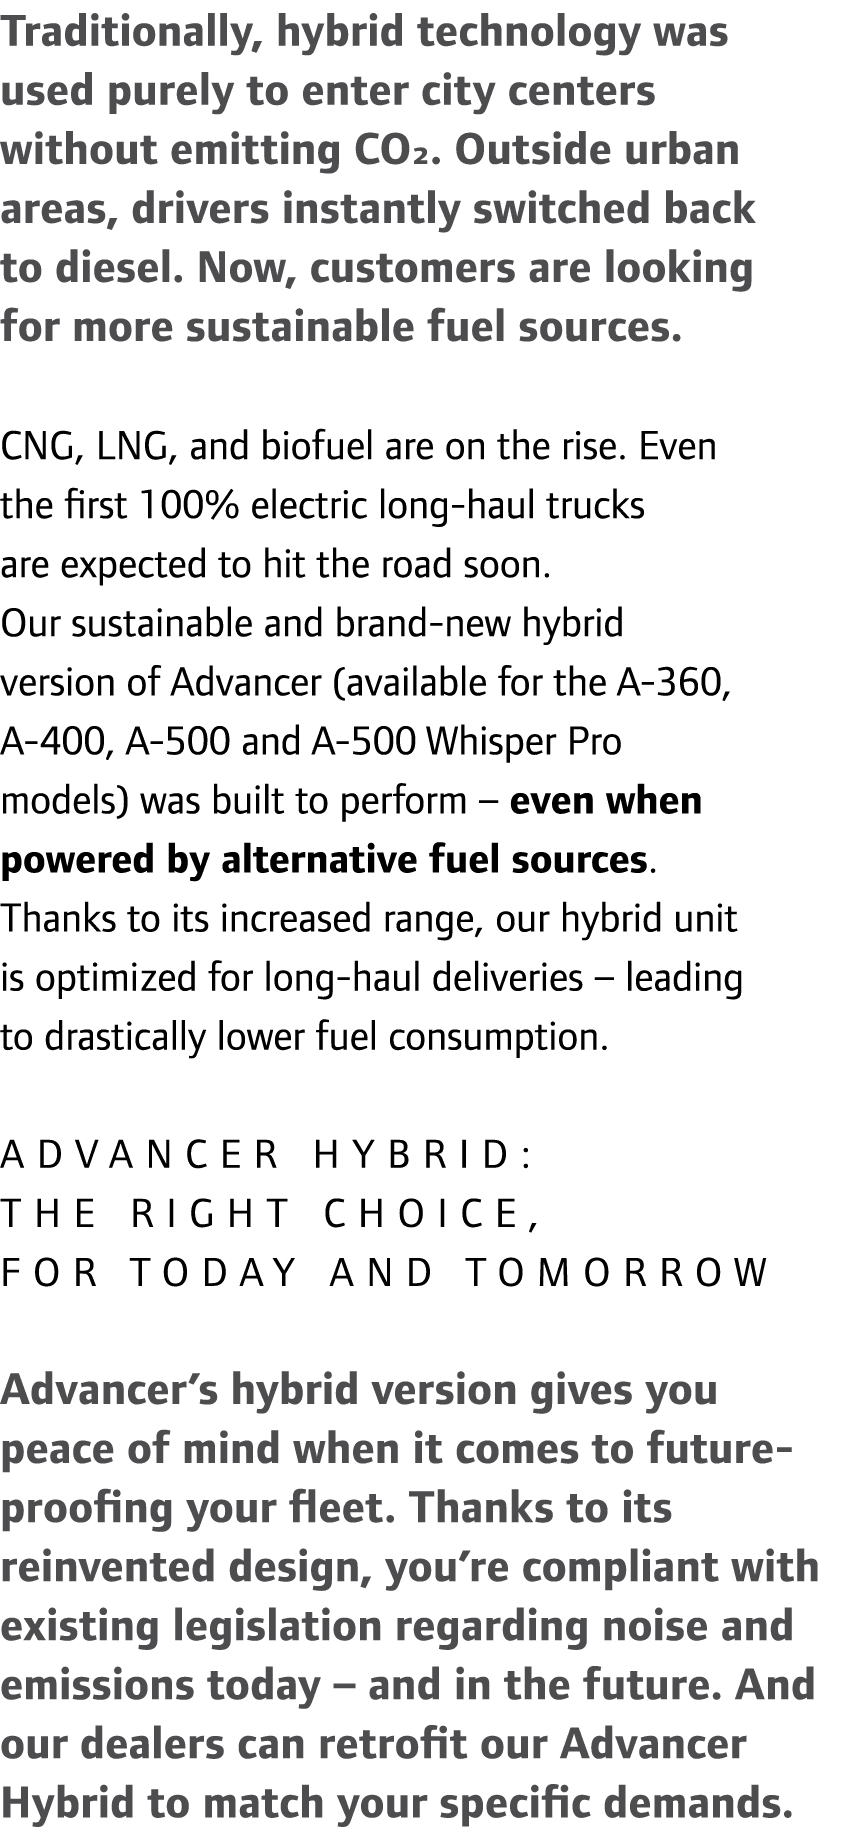 Traditionally, hybrid technology was used purely to enter city centers without emitting CO². Outside urban areas, dri...